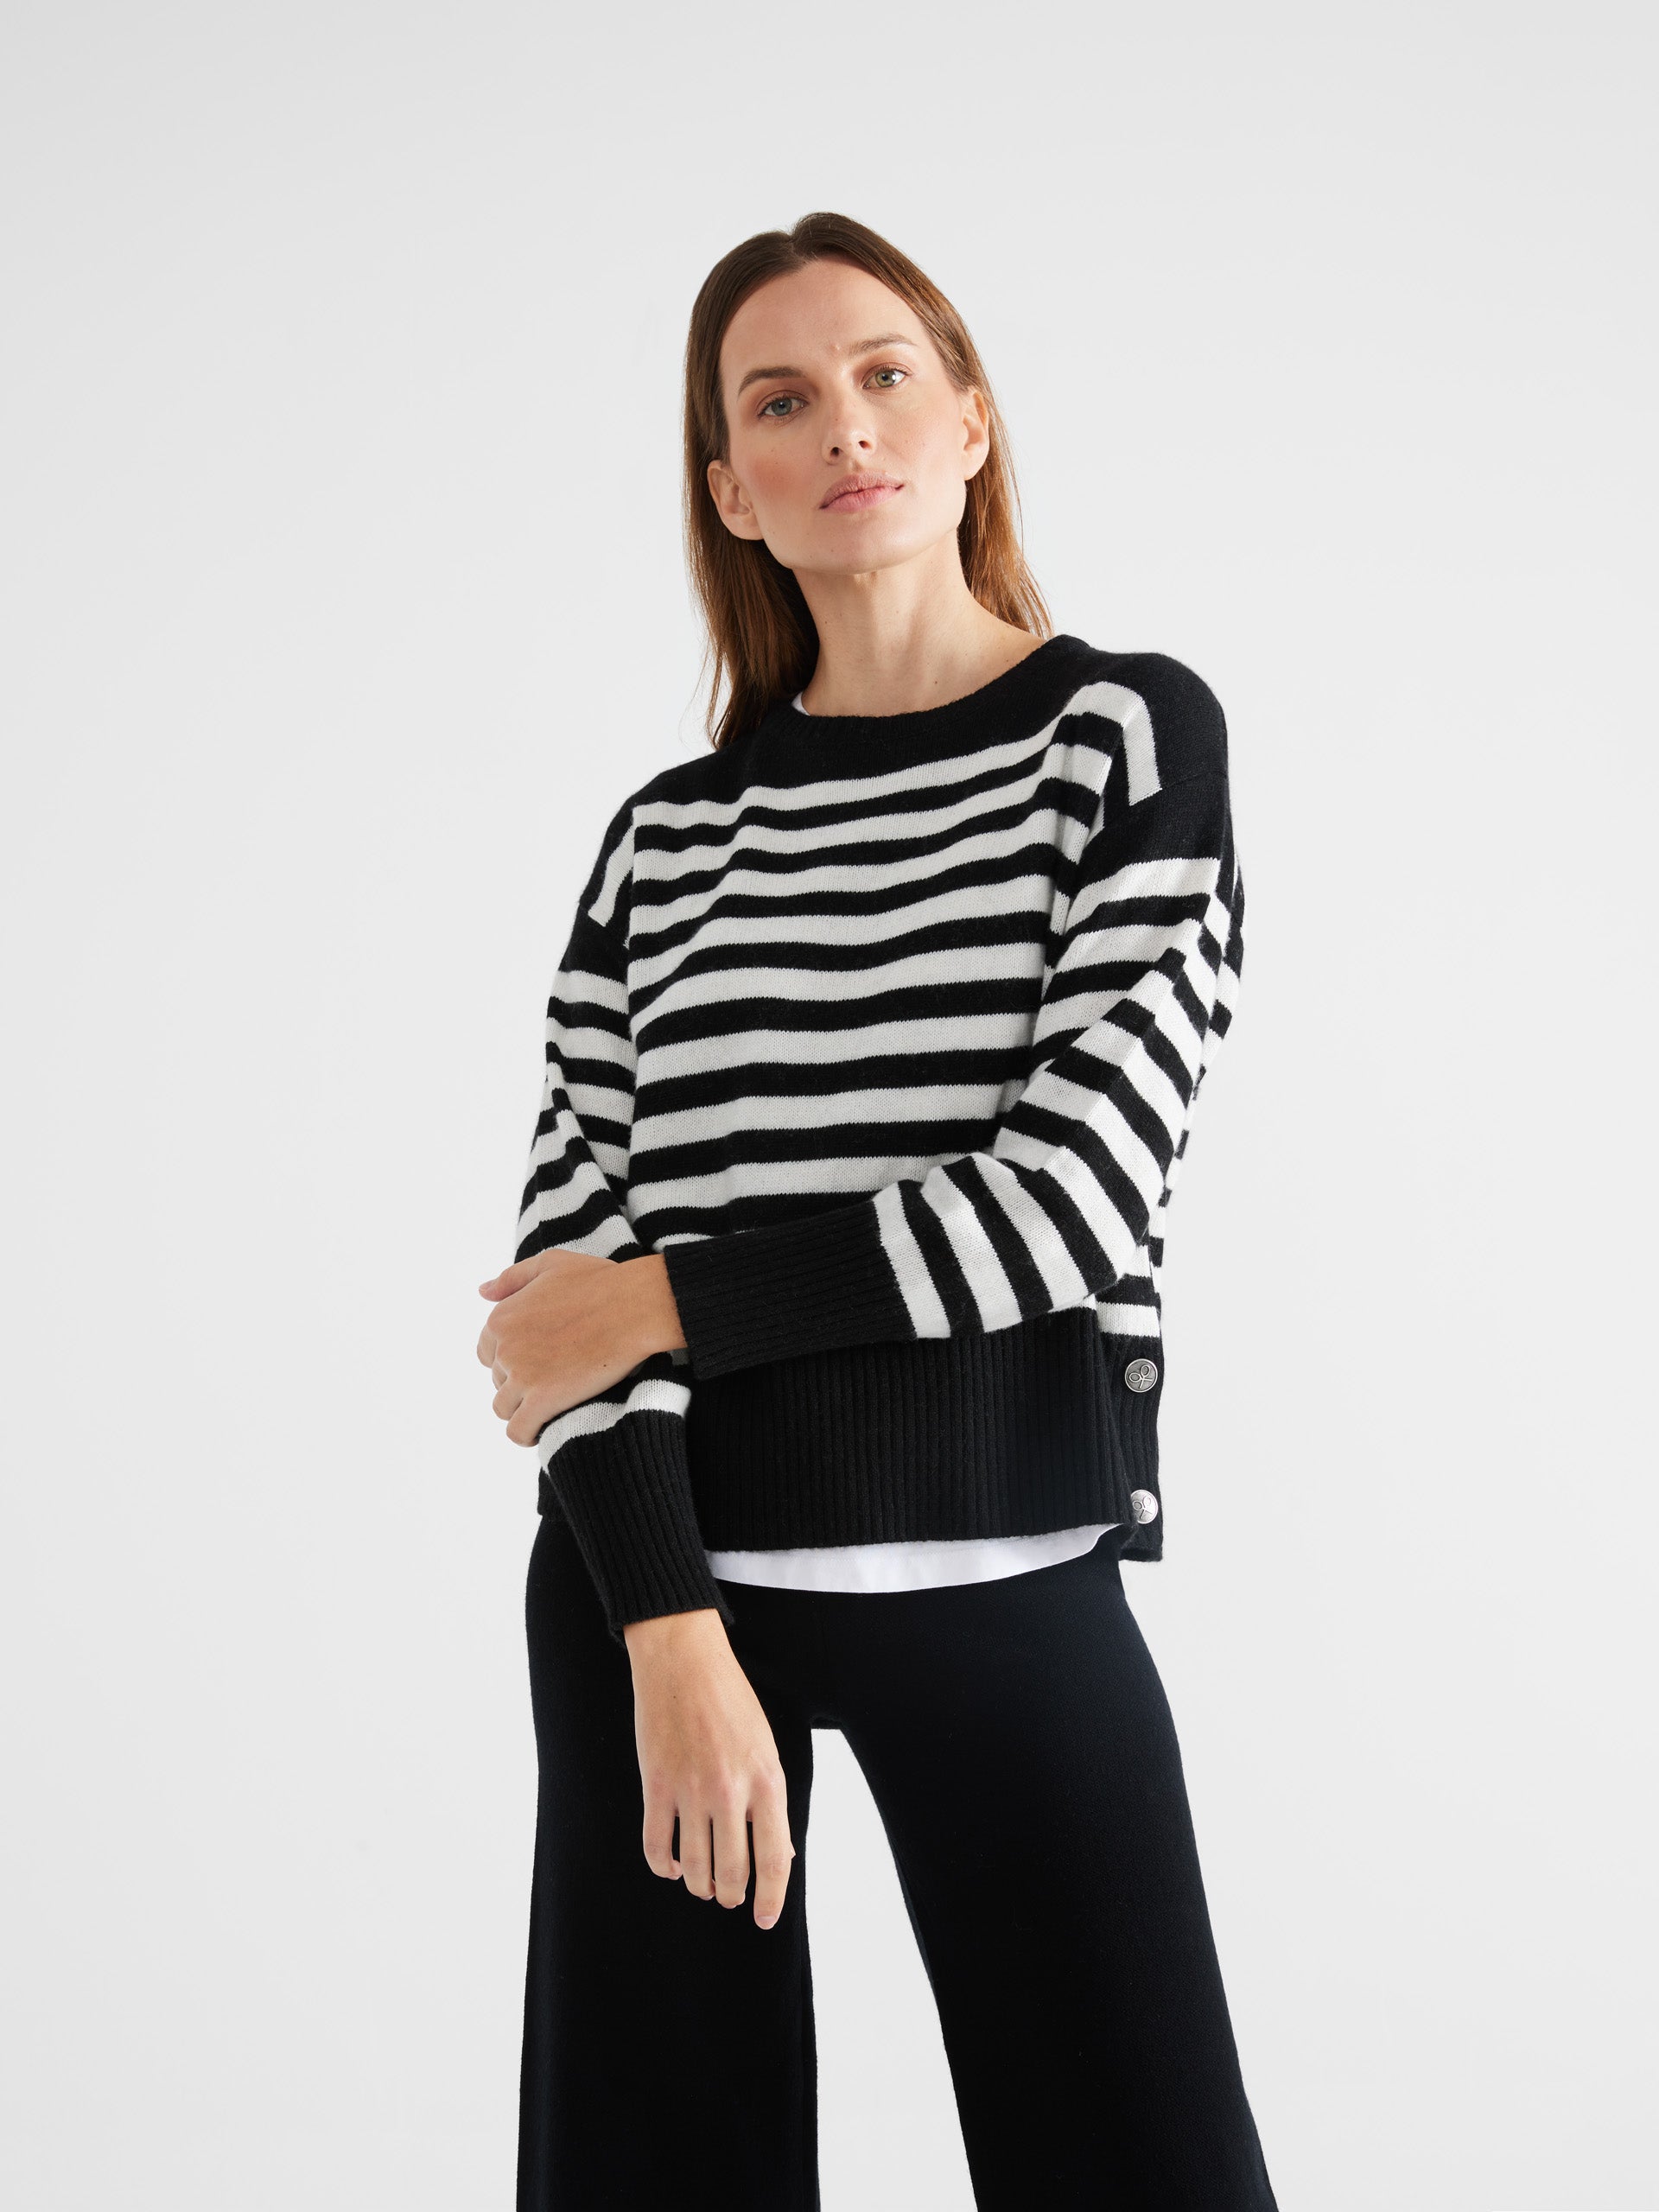 Raw and black striped knit sweater